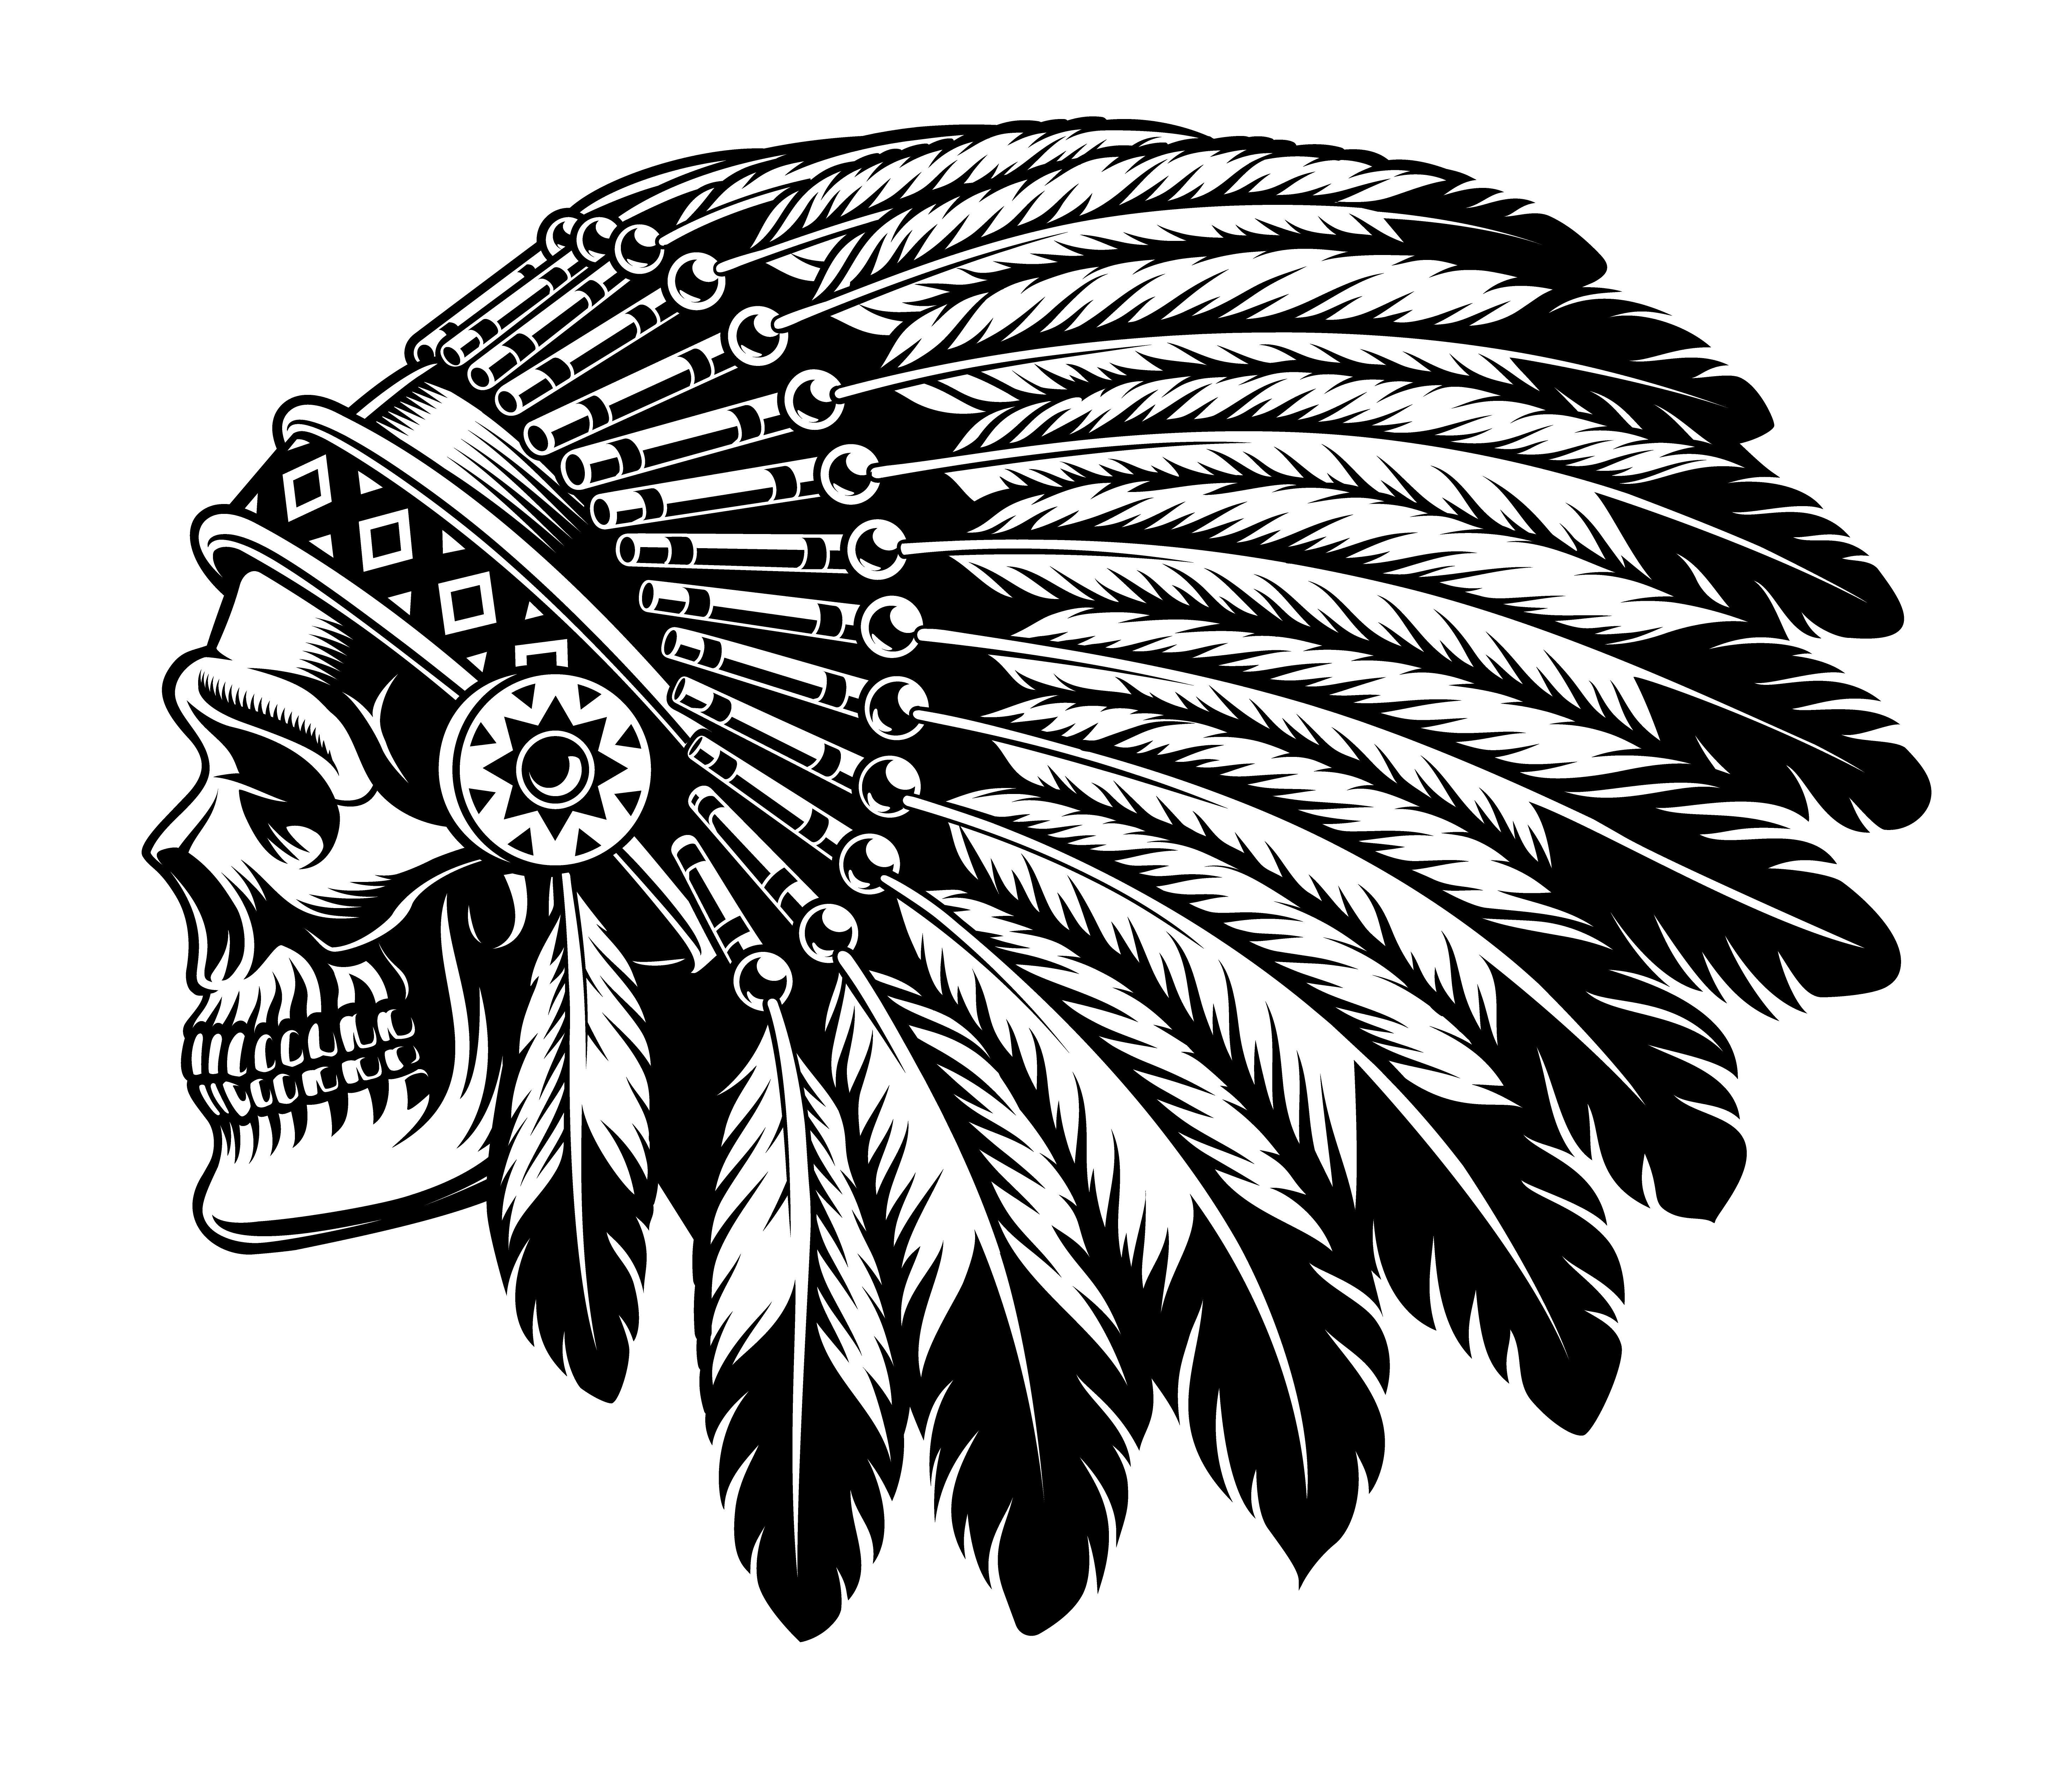 Black and white illustration of an Indian skull 